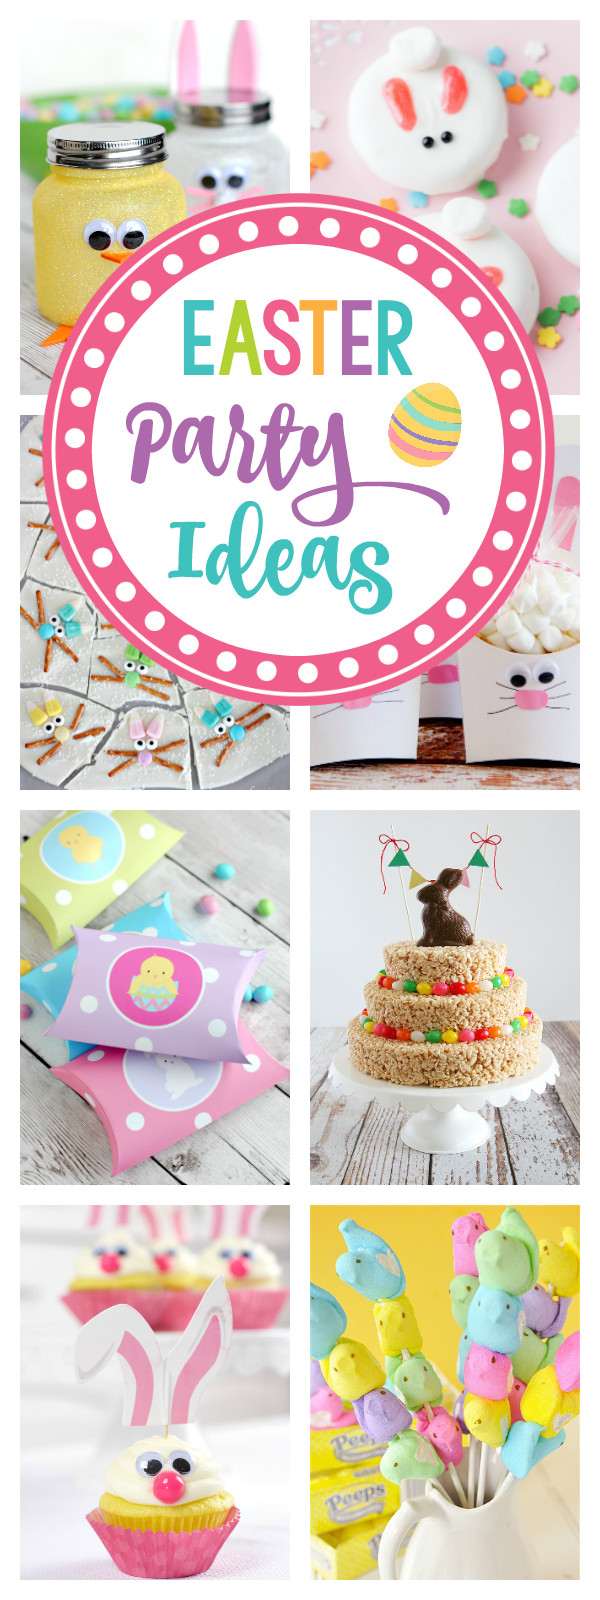 Easter Party Favors Ideas
 25 Fun Easter Party Ideas for Kids – Fun Squared